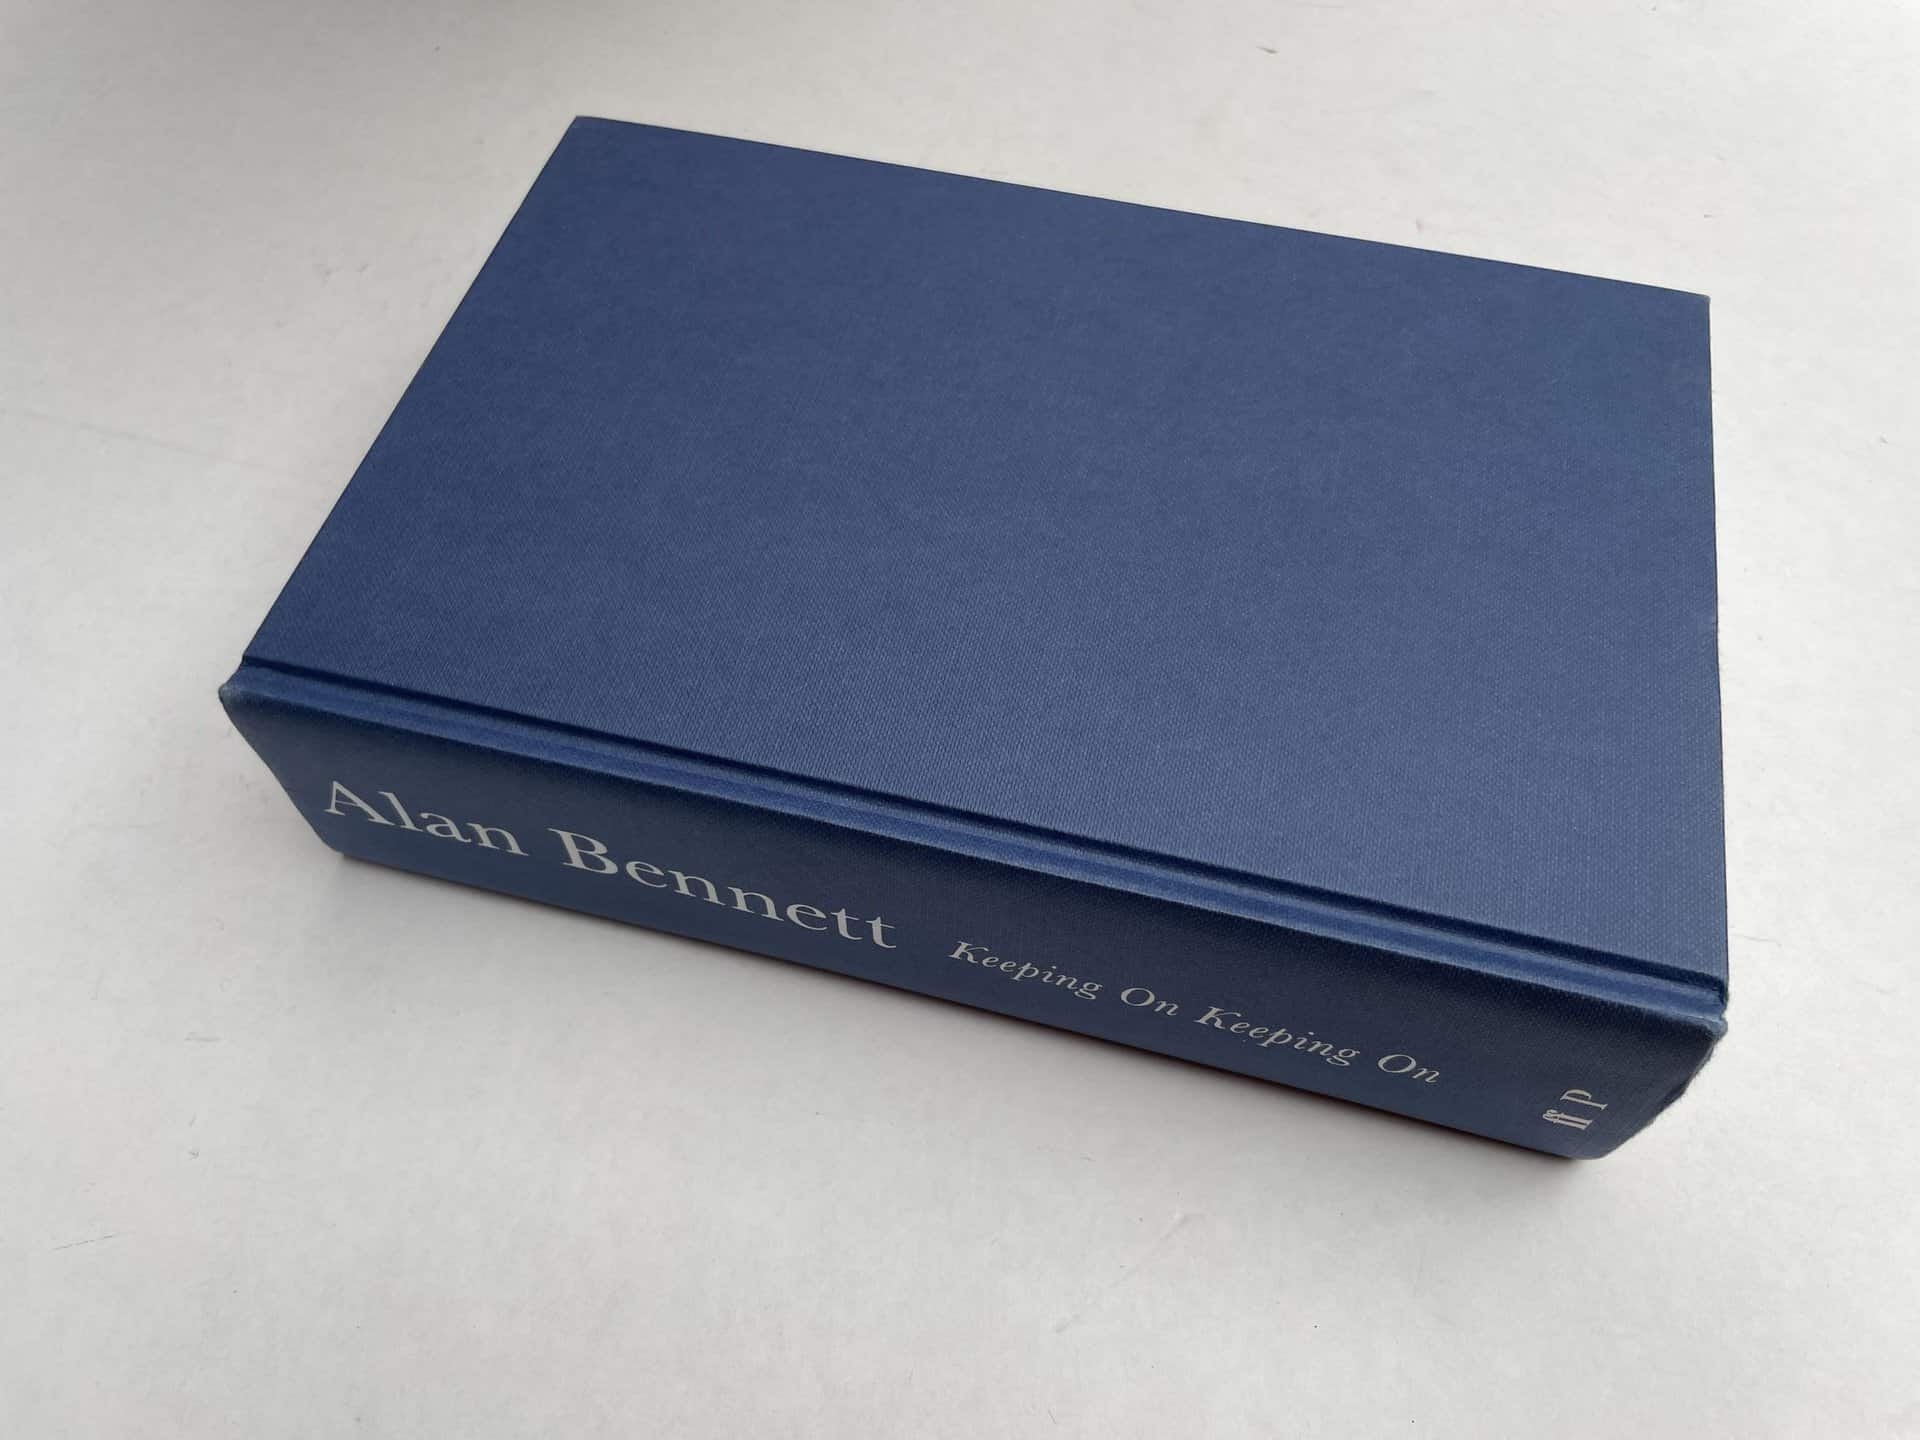 alan bennett keeping on signed first edition4